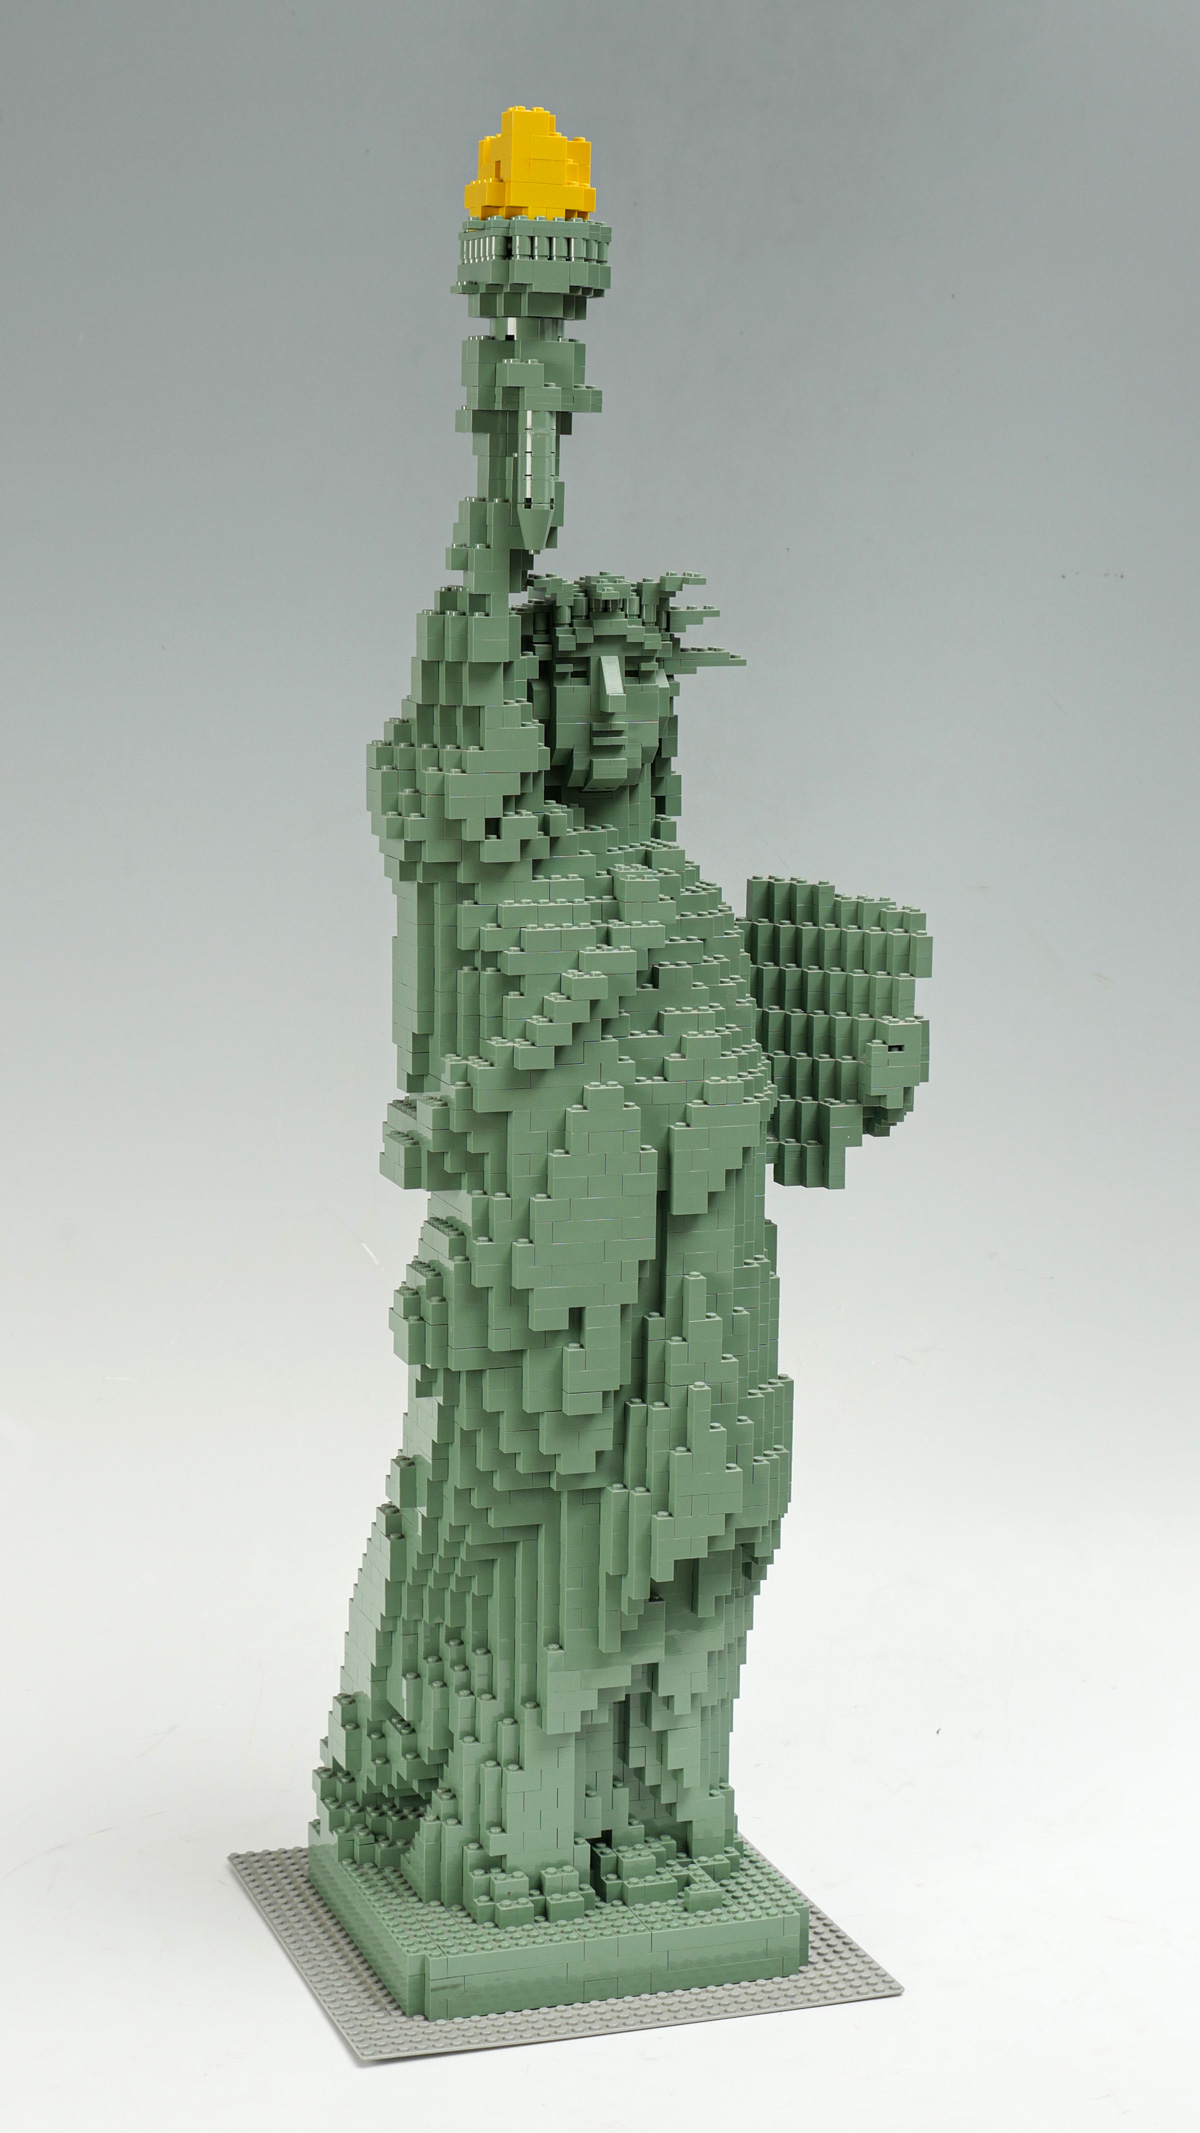 LEGO STATUE OF LIBERTY 33 TALL!